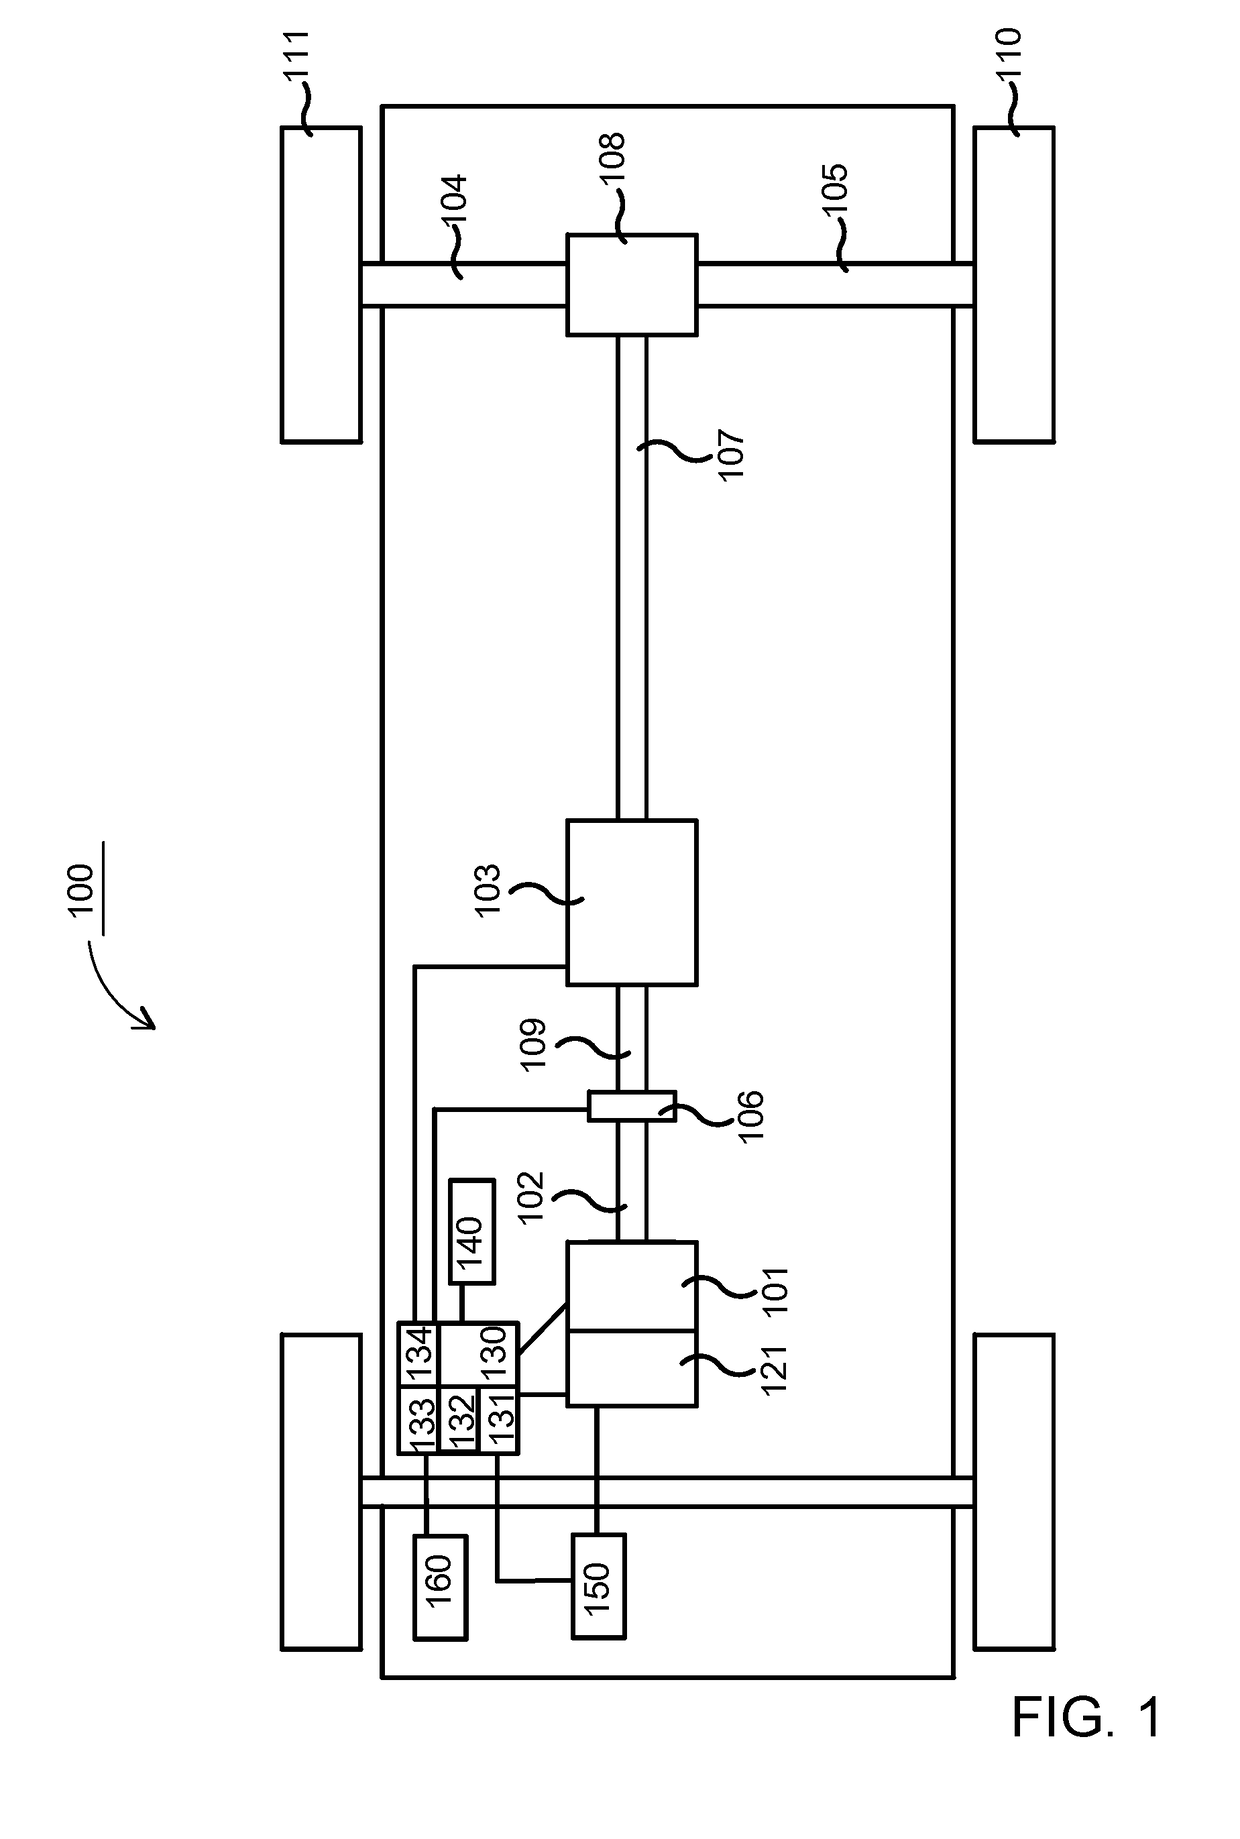 Control of an internal combustion engine in a vehicle